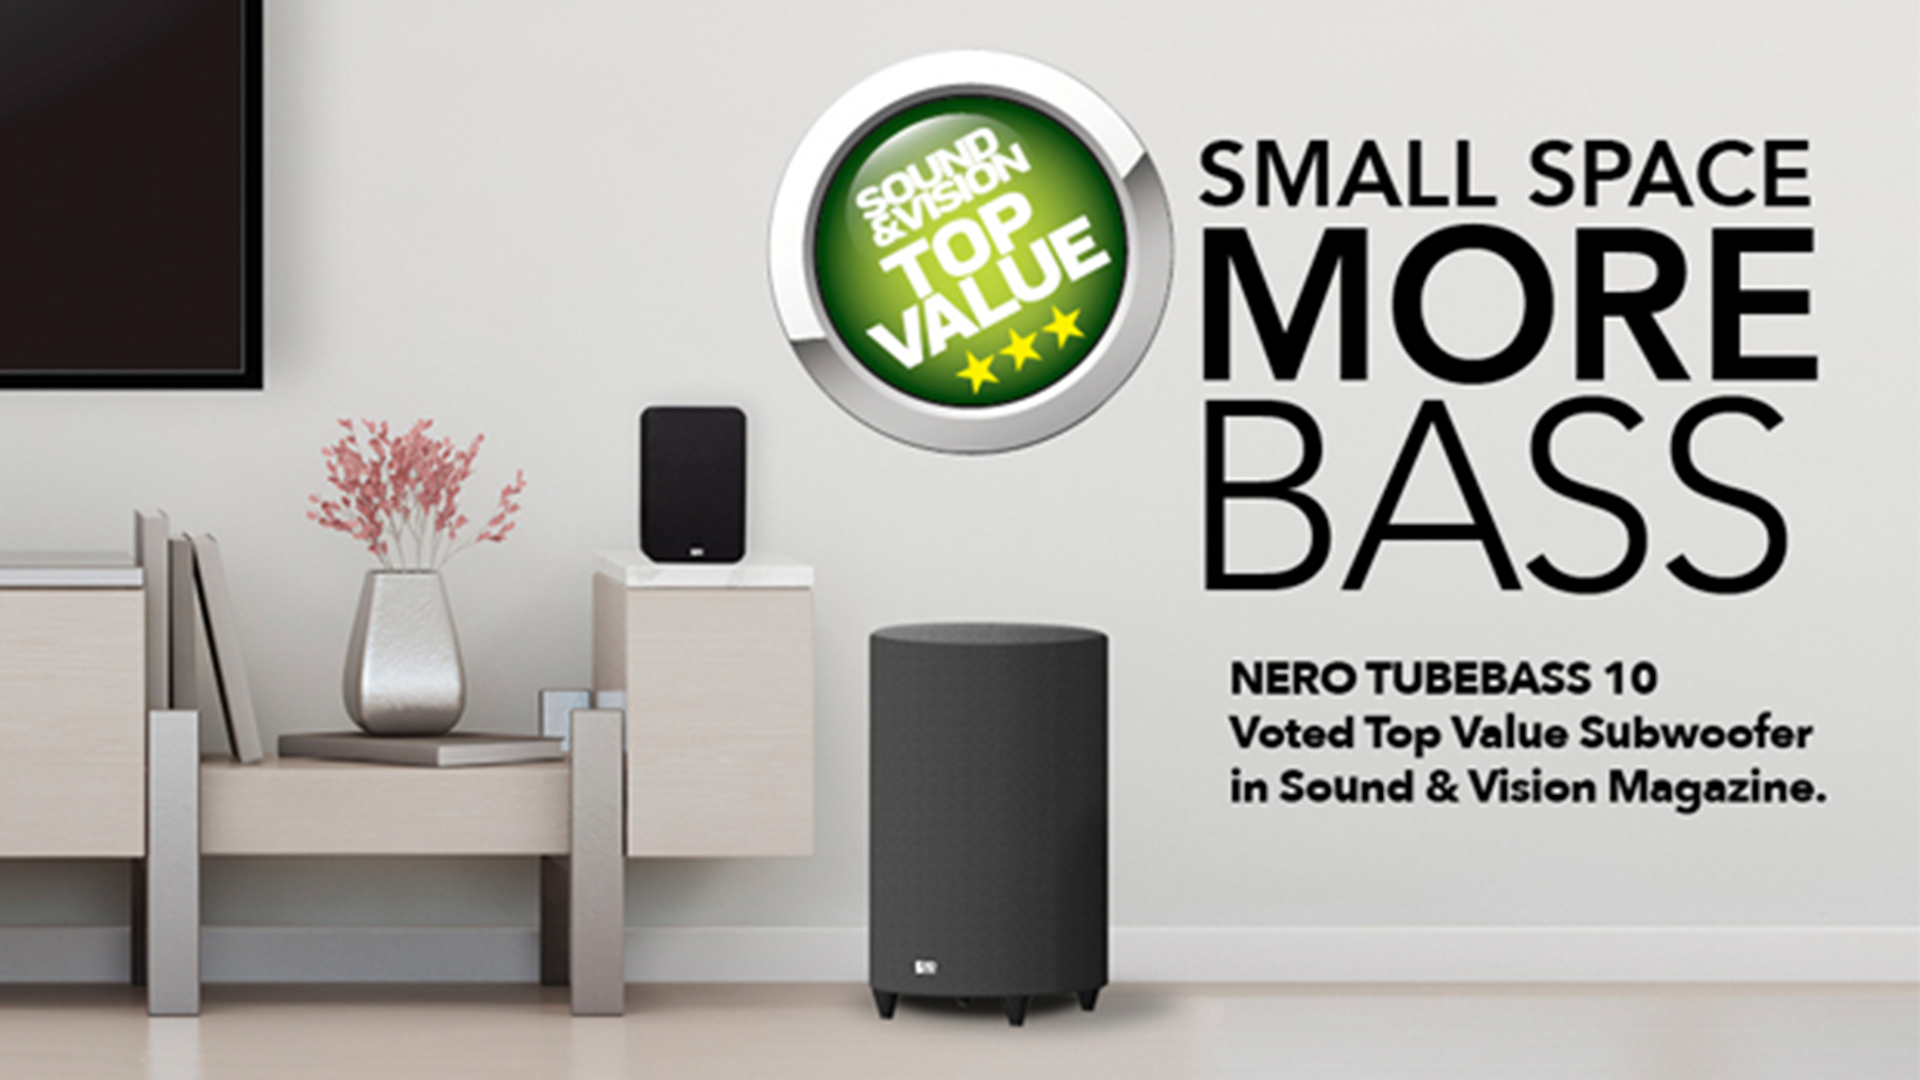 Nero Tubebass – Rated TOP VALUE SUBWOOFER in Sound & Vision Magazine